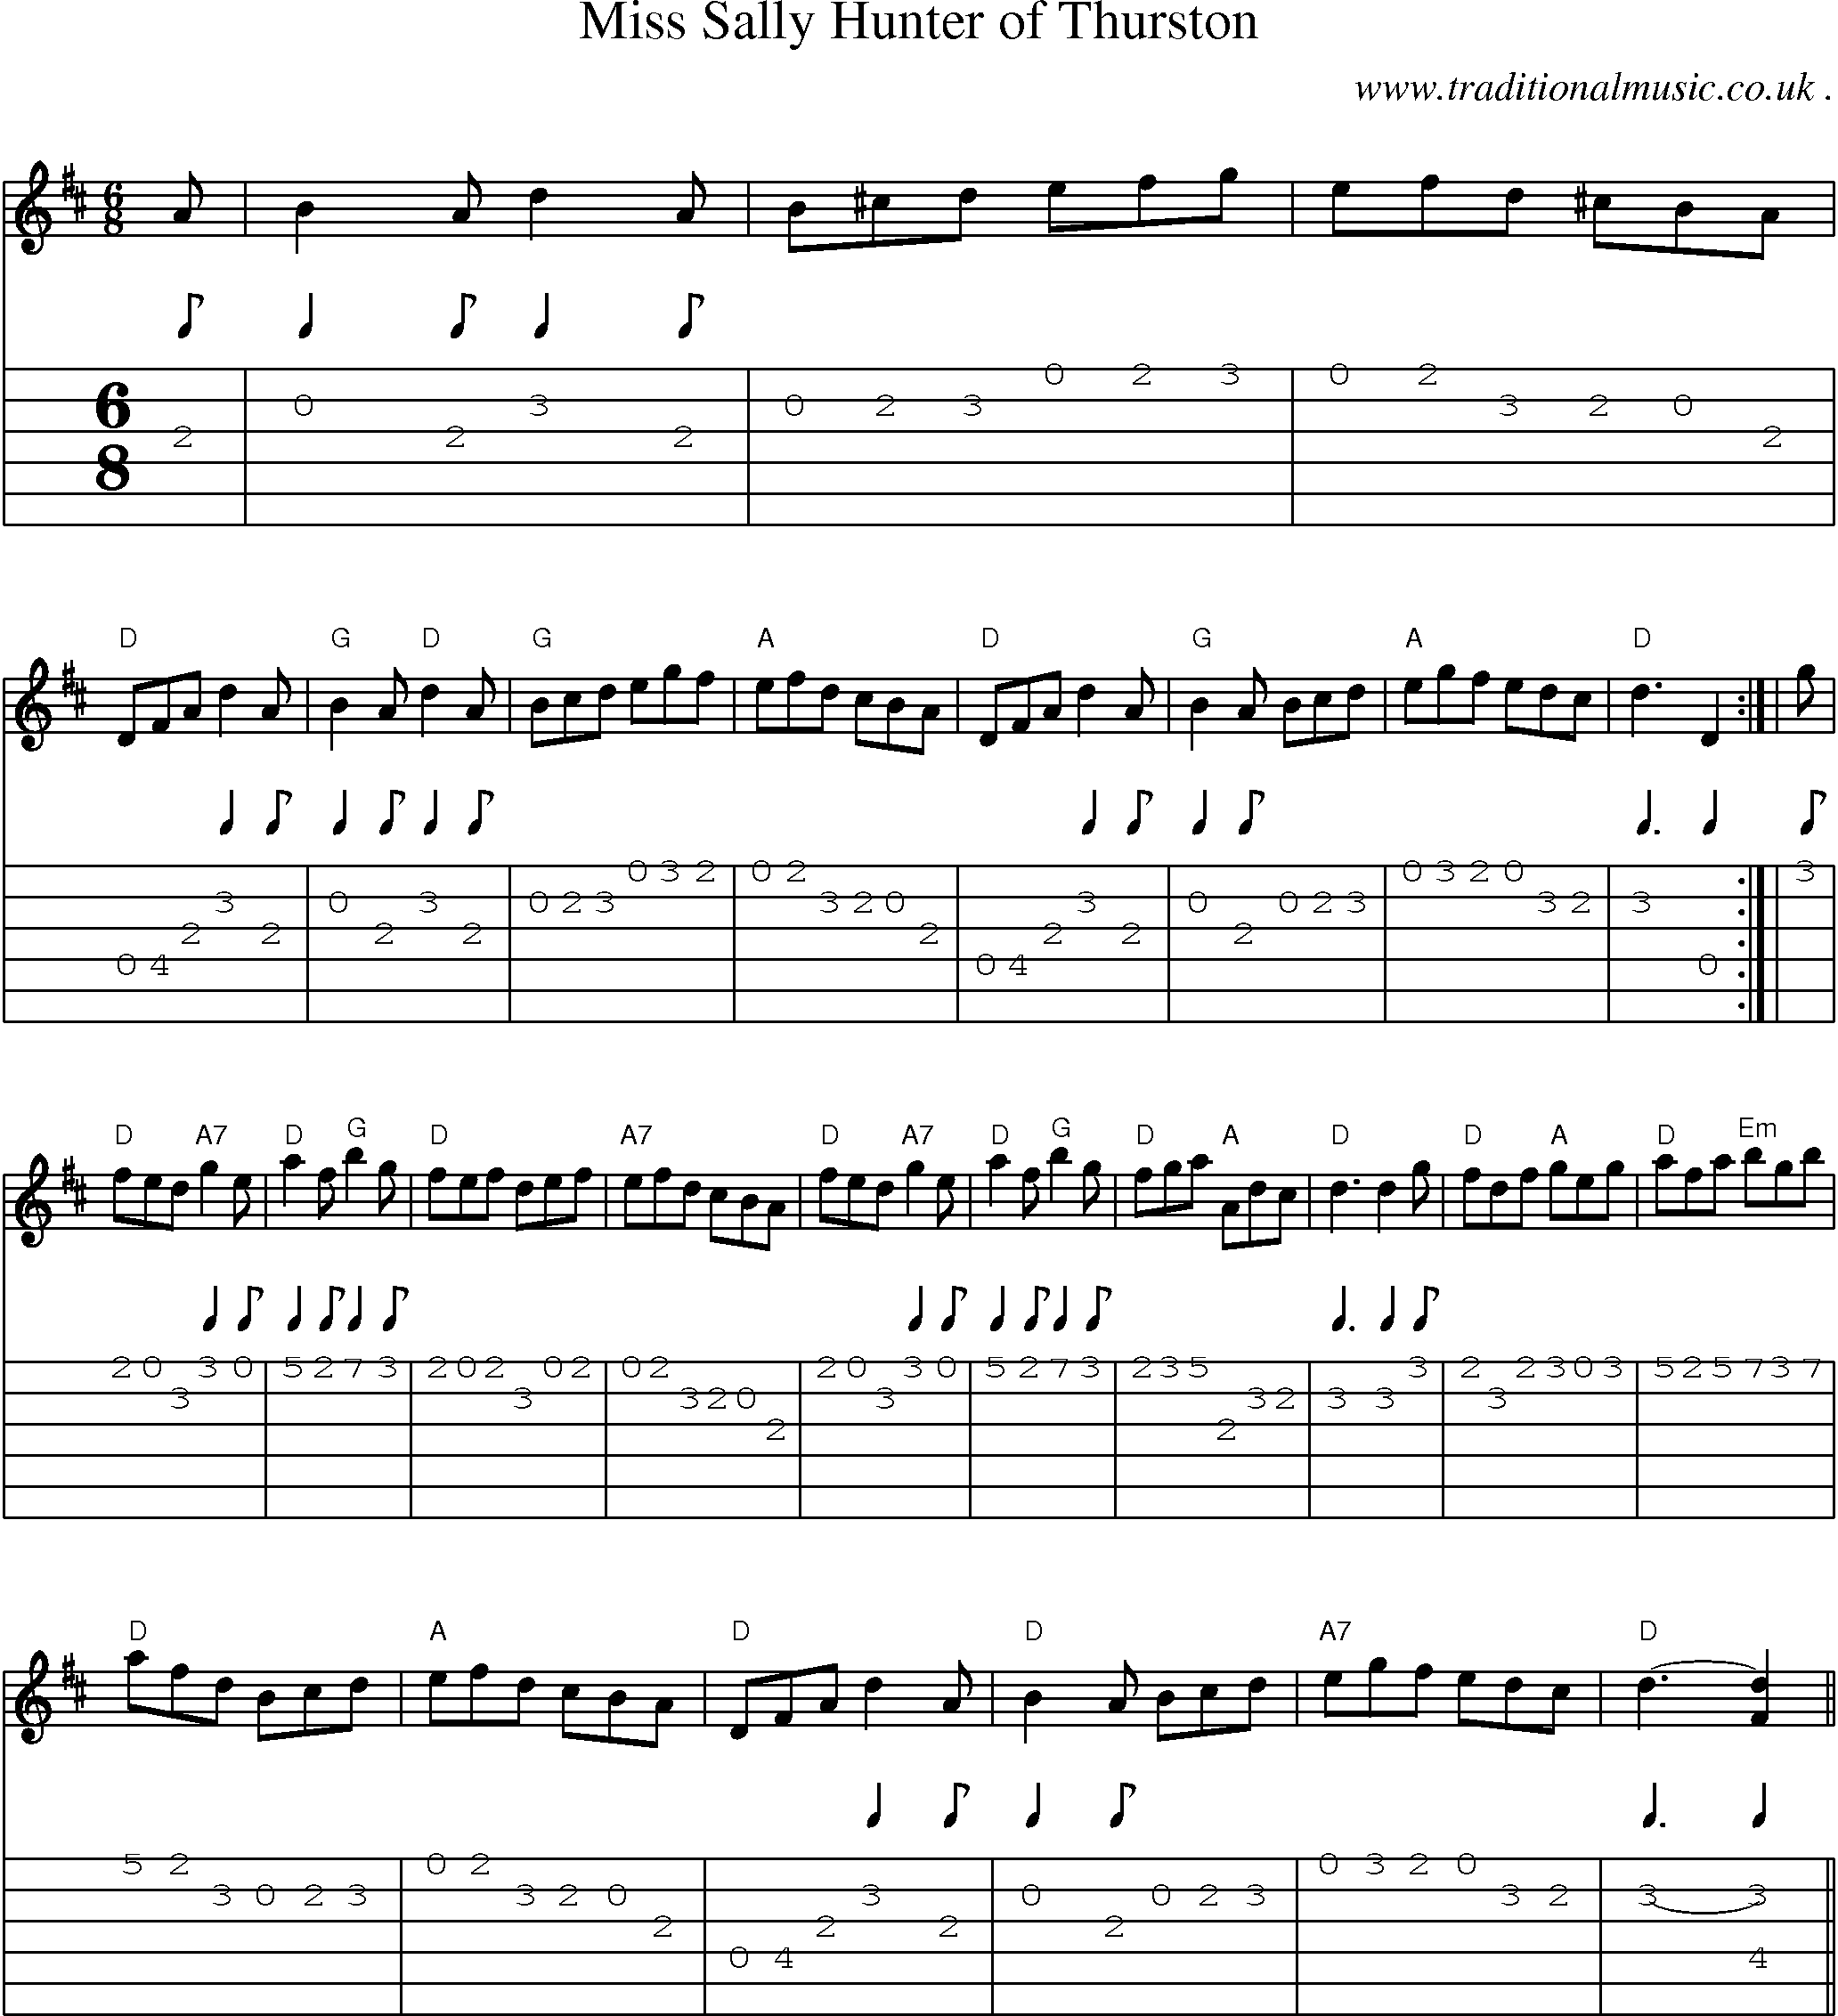 Sheet-music  score, Chords and Guitar Tabs for Miss Sally Hunter Of Thurston